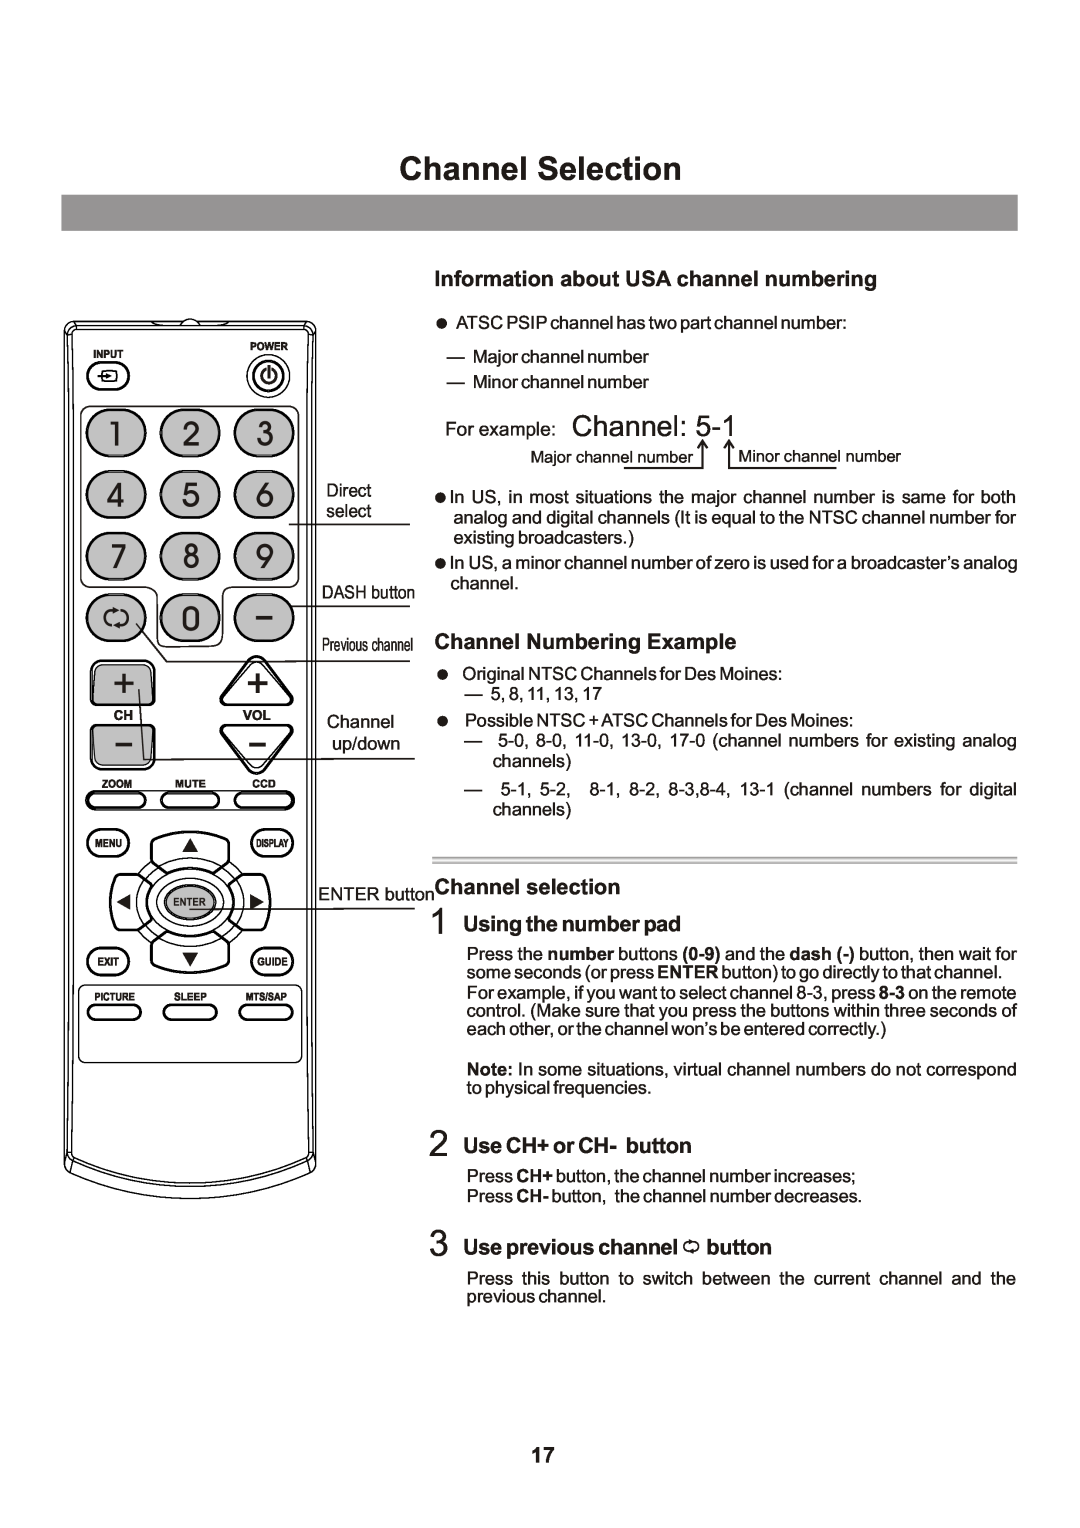 Memorex Flat Screen Tv manual Channel Selection, Information about USA channel numbering, Channel Numbering Example 